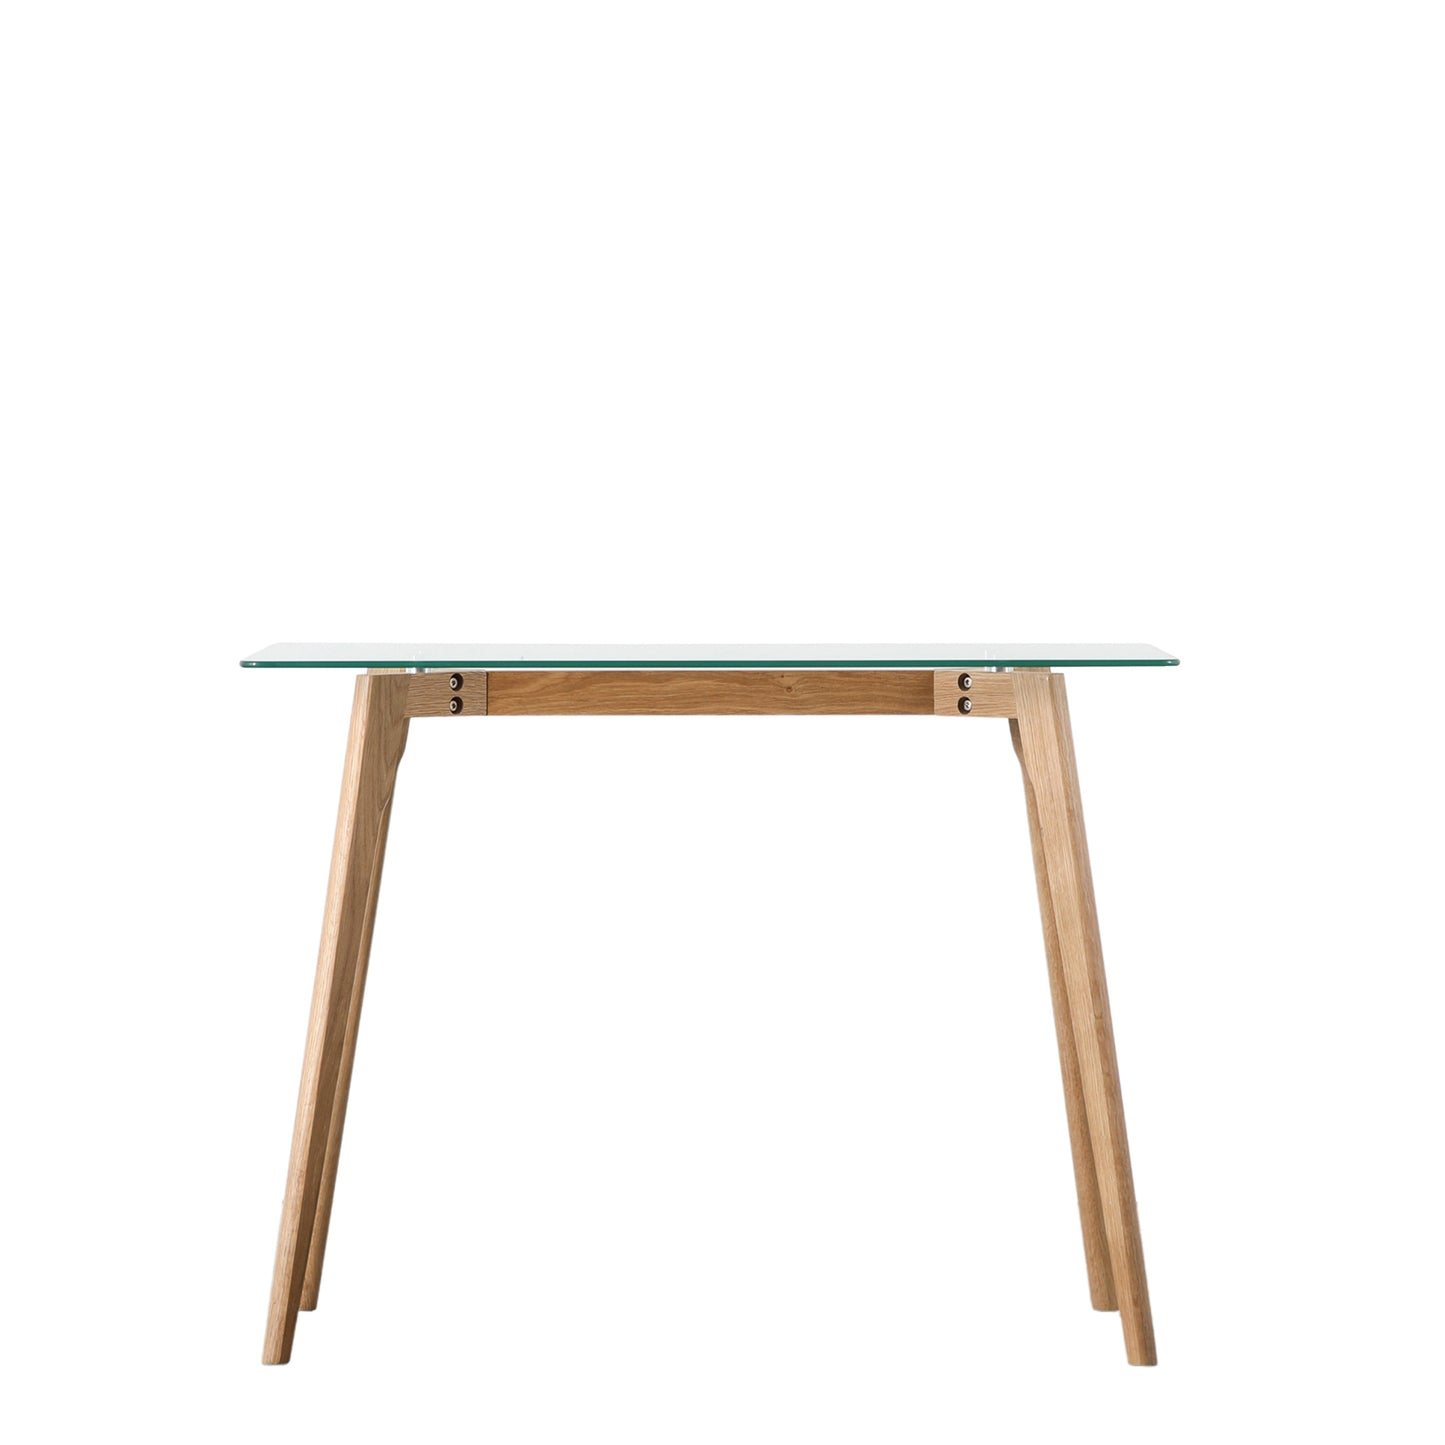 An oak desk with a glass top and wooden legs, perfect for home furniture and interior decor.